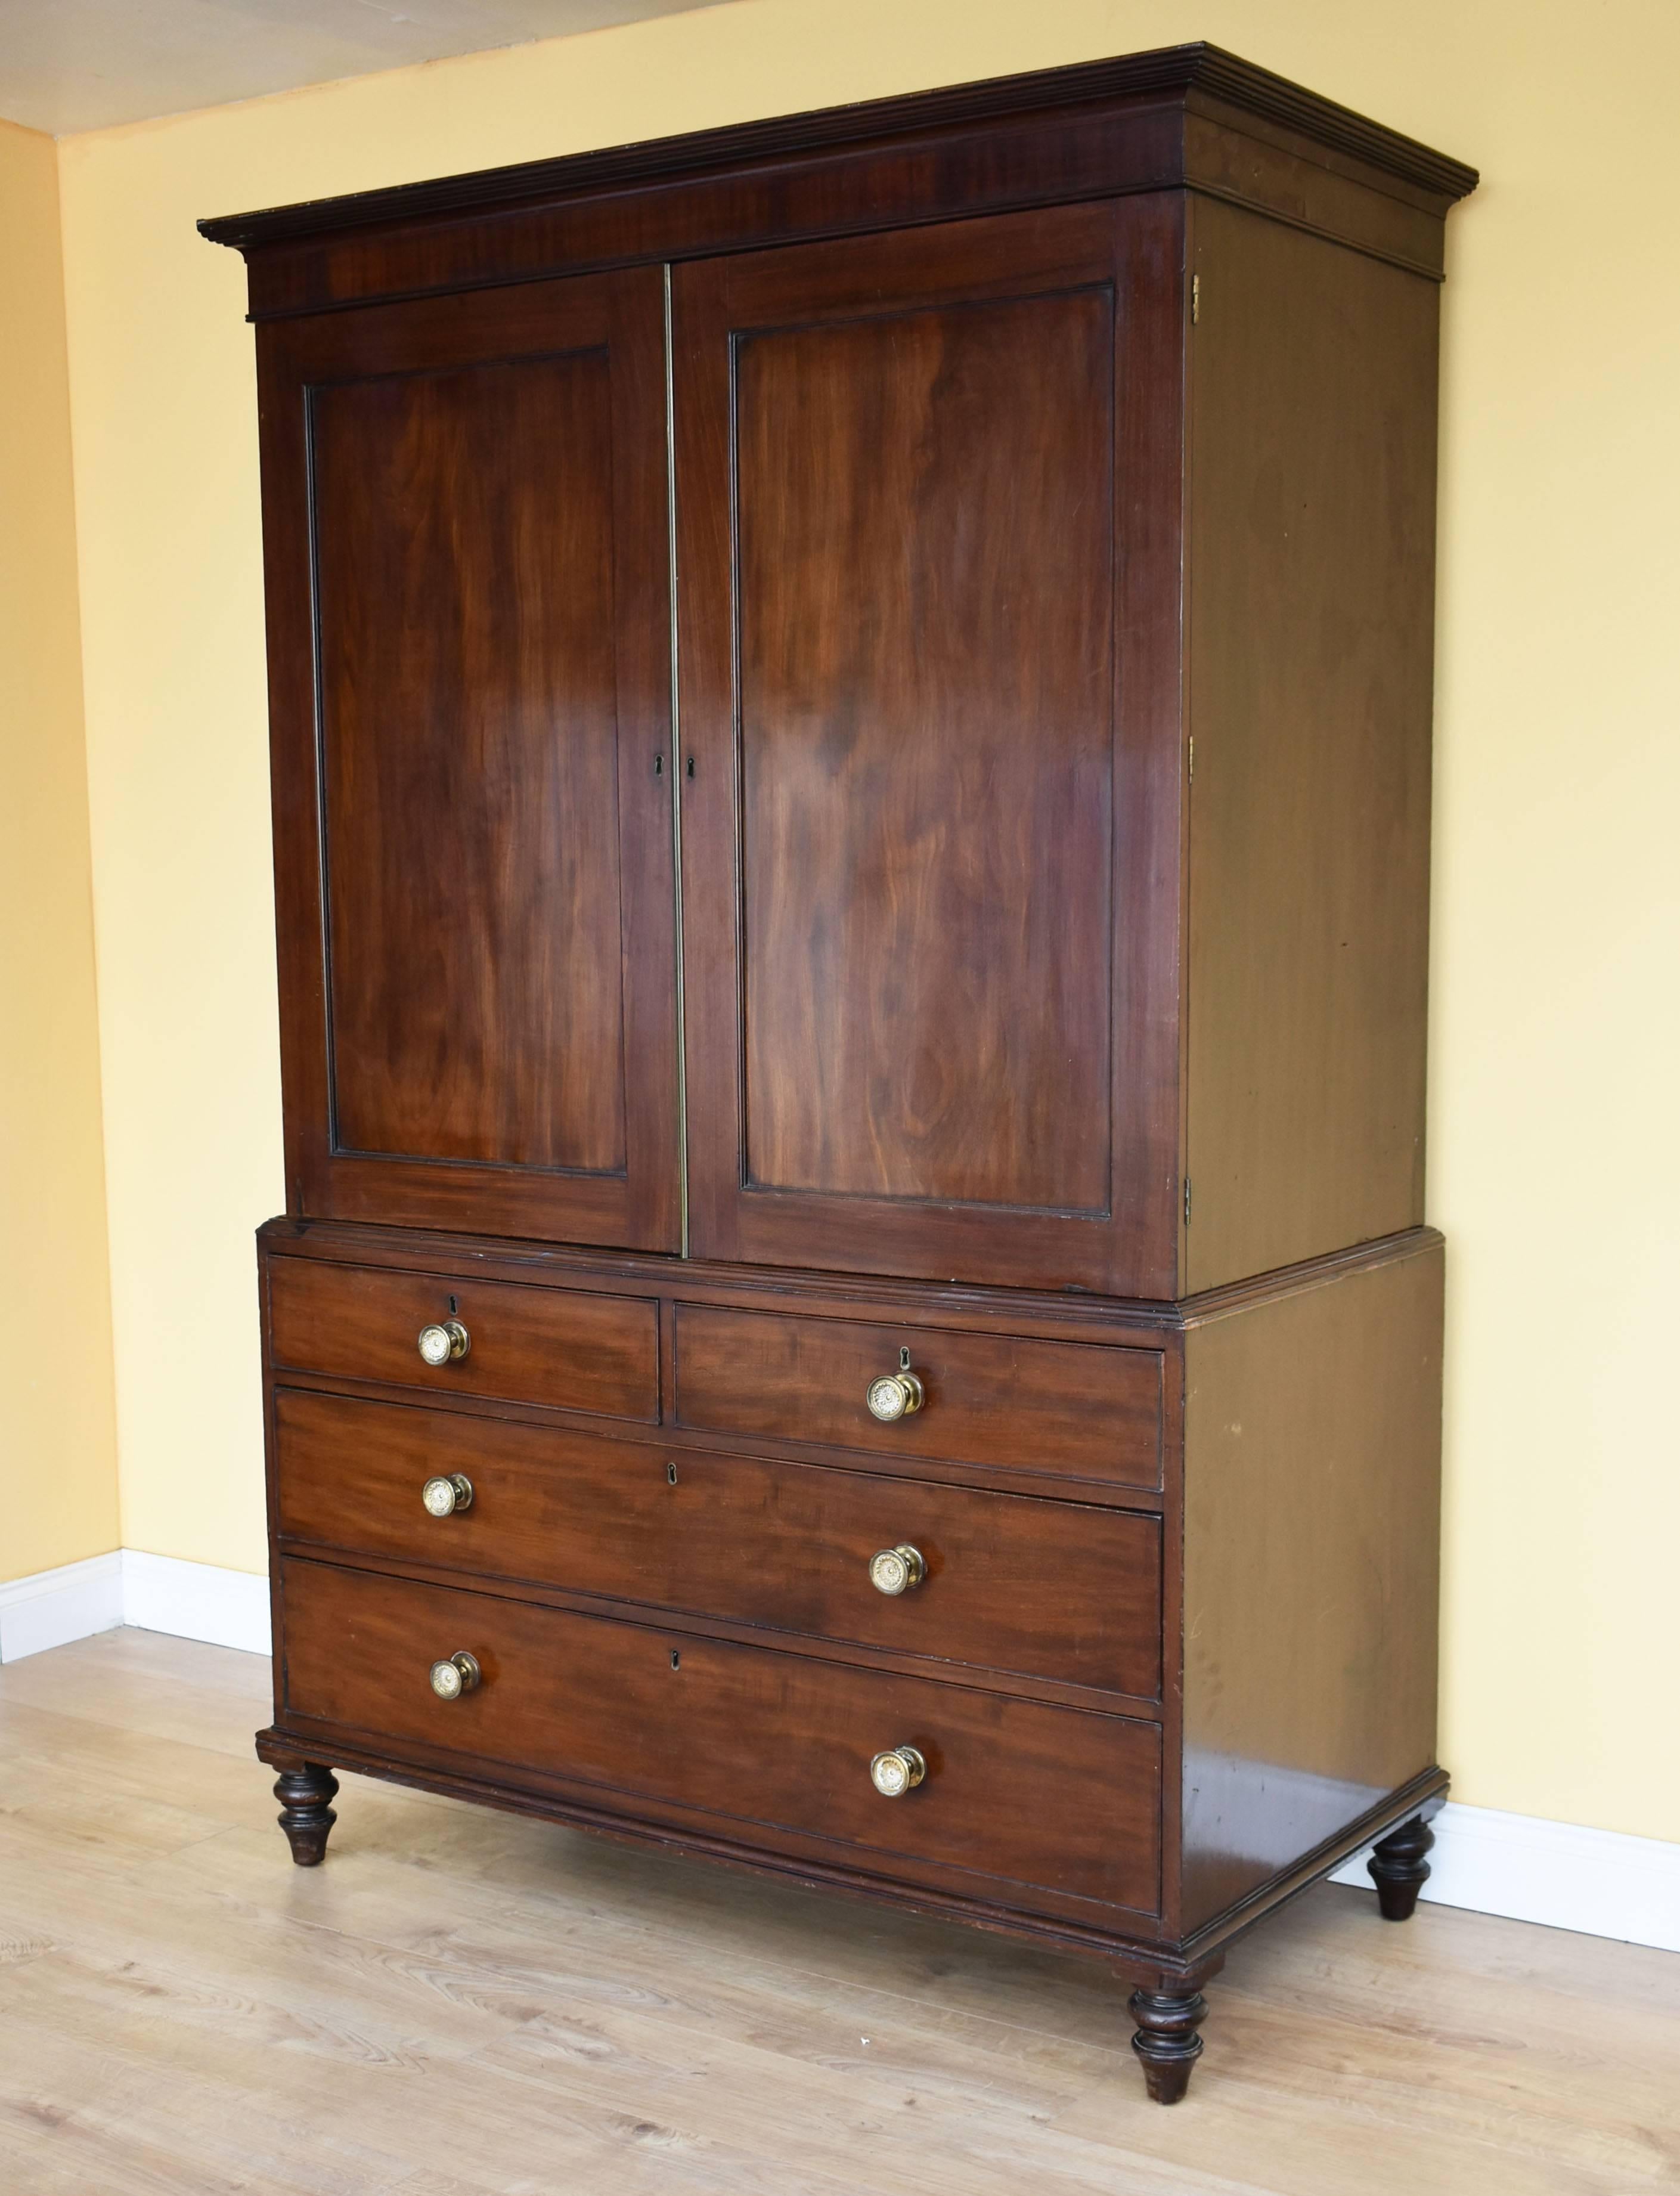 For sale is a good quality Regency mahogany linen press, with a stepped cornice over two paneled doors, opening to reveal ample hanging space. Below this, there is an assortment of four drawers, two short over two long. The press stands on elegantly